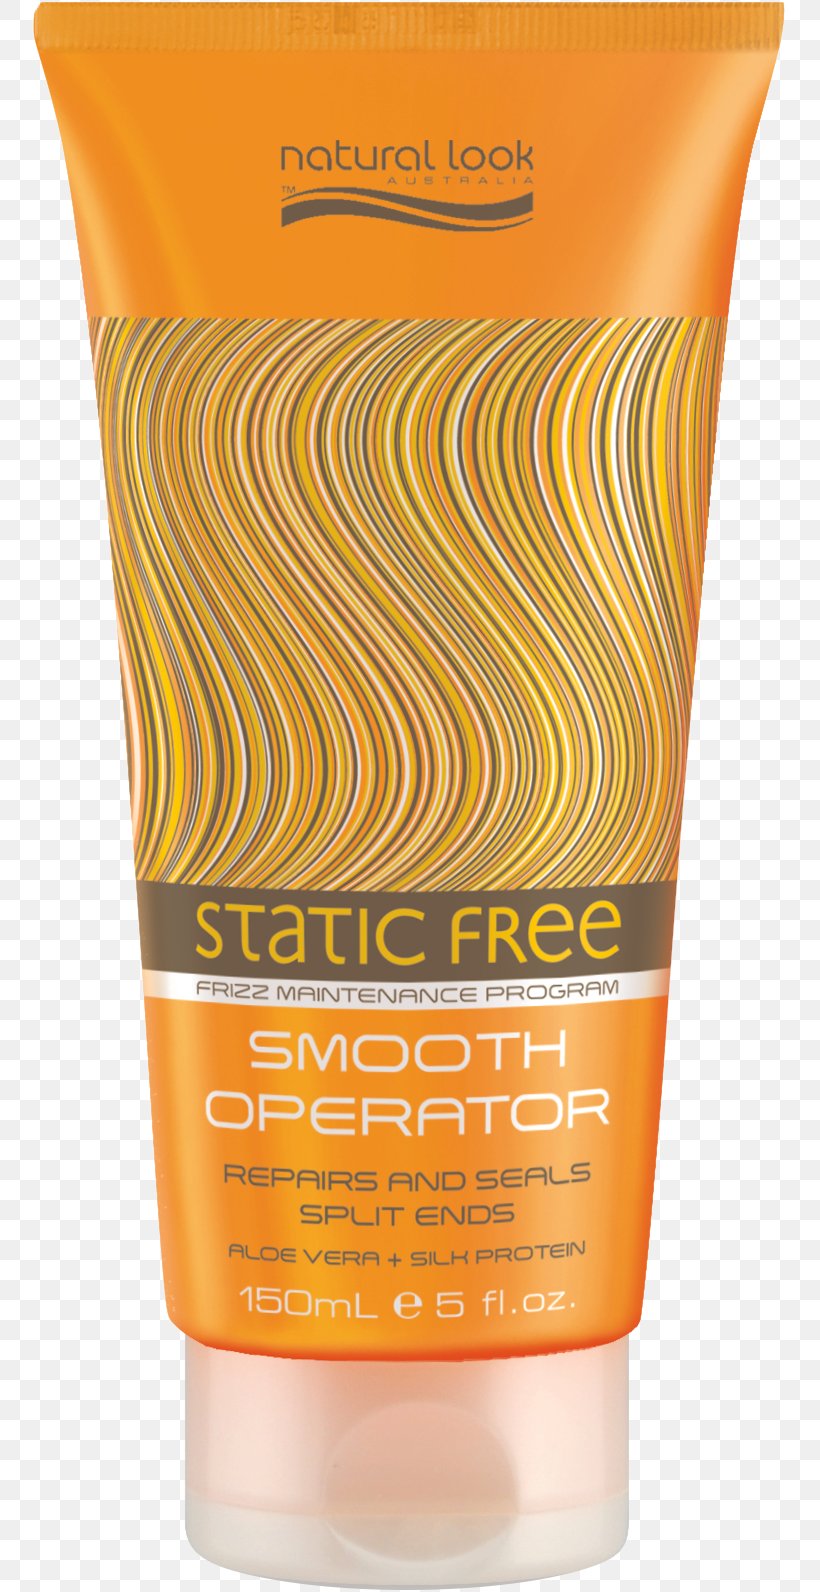 Sunscreen Lotion Cream Product Orange S.A., PNG, 757x1592px, Sunscreen, Cream, Lotion, Orange Sa, Skin Care Download Free